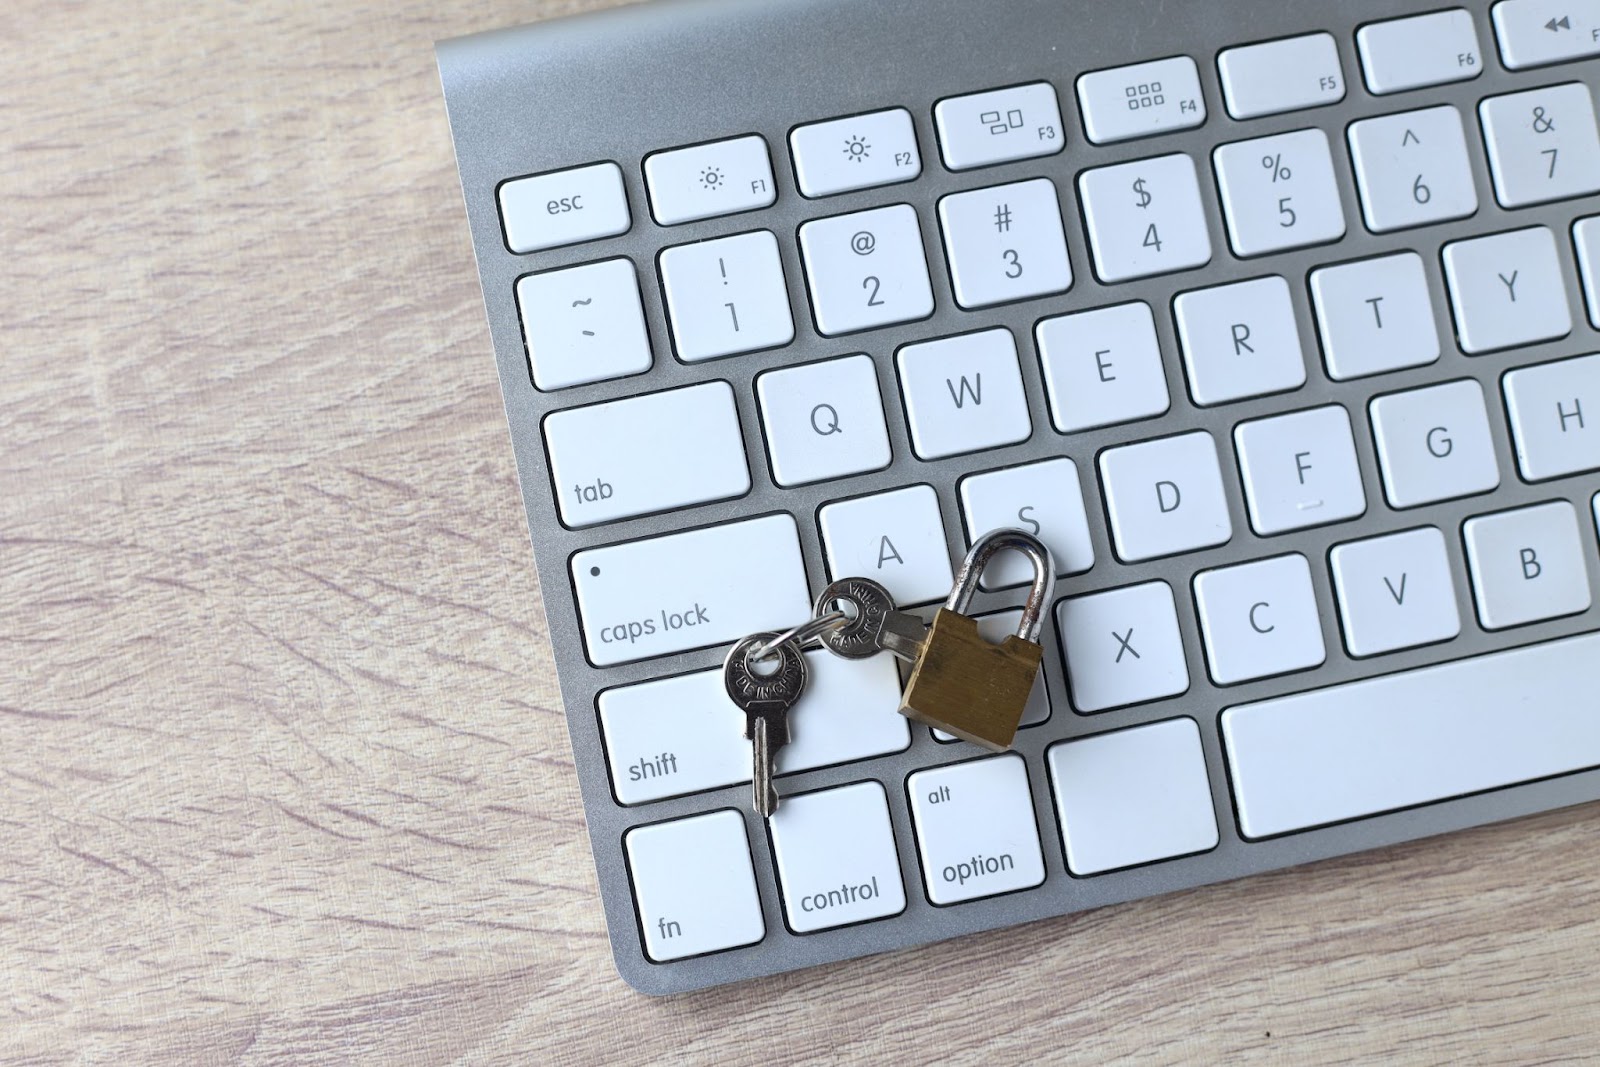  Padlock on a computer keyboard symbolizing cybersecurity risk management.